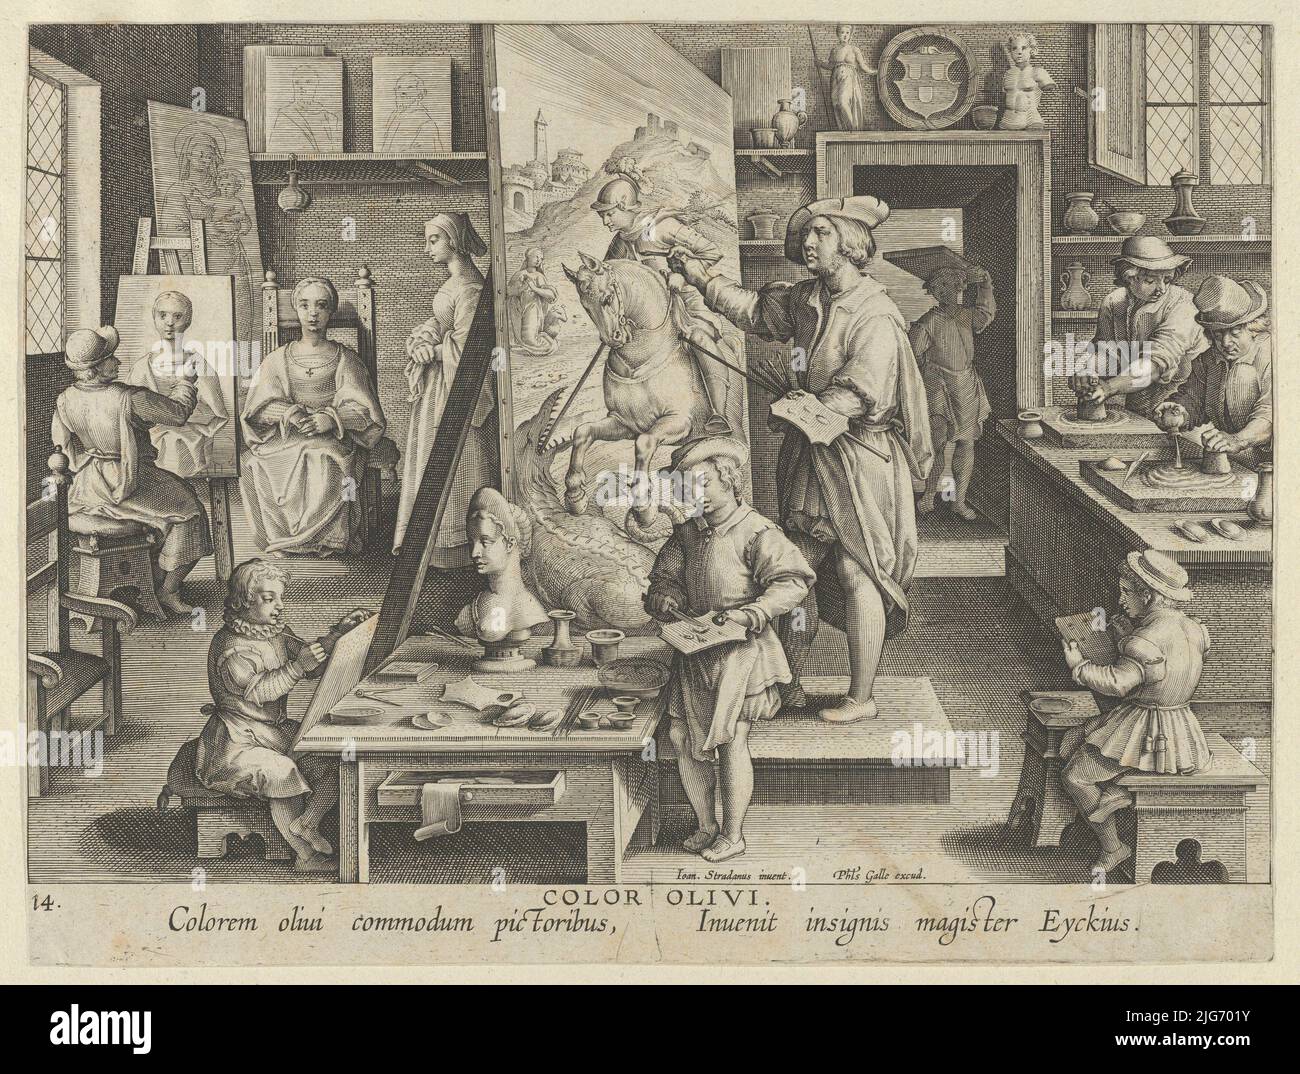 New Inventions of Modern Times [Nova Reperta], The Invention of Oil Painting, plate 14, ca. 1600. Stock Photo